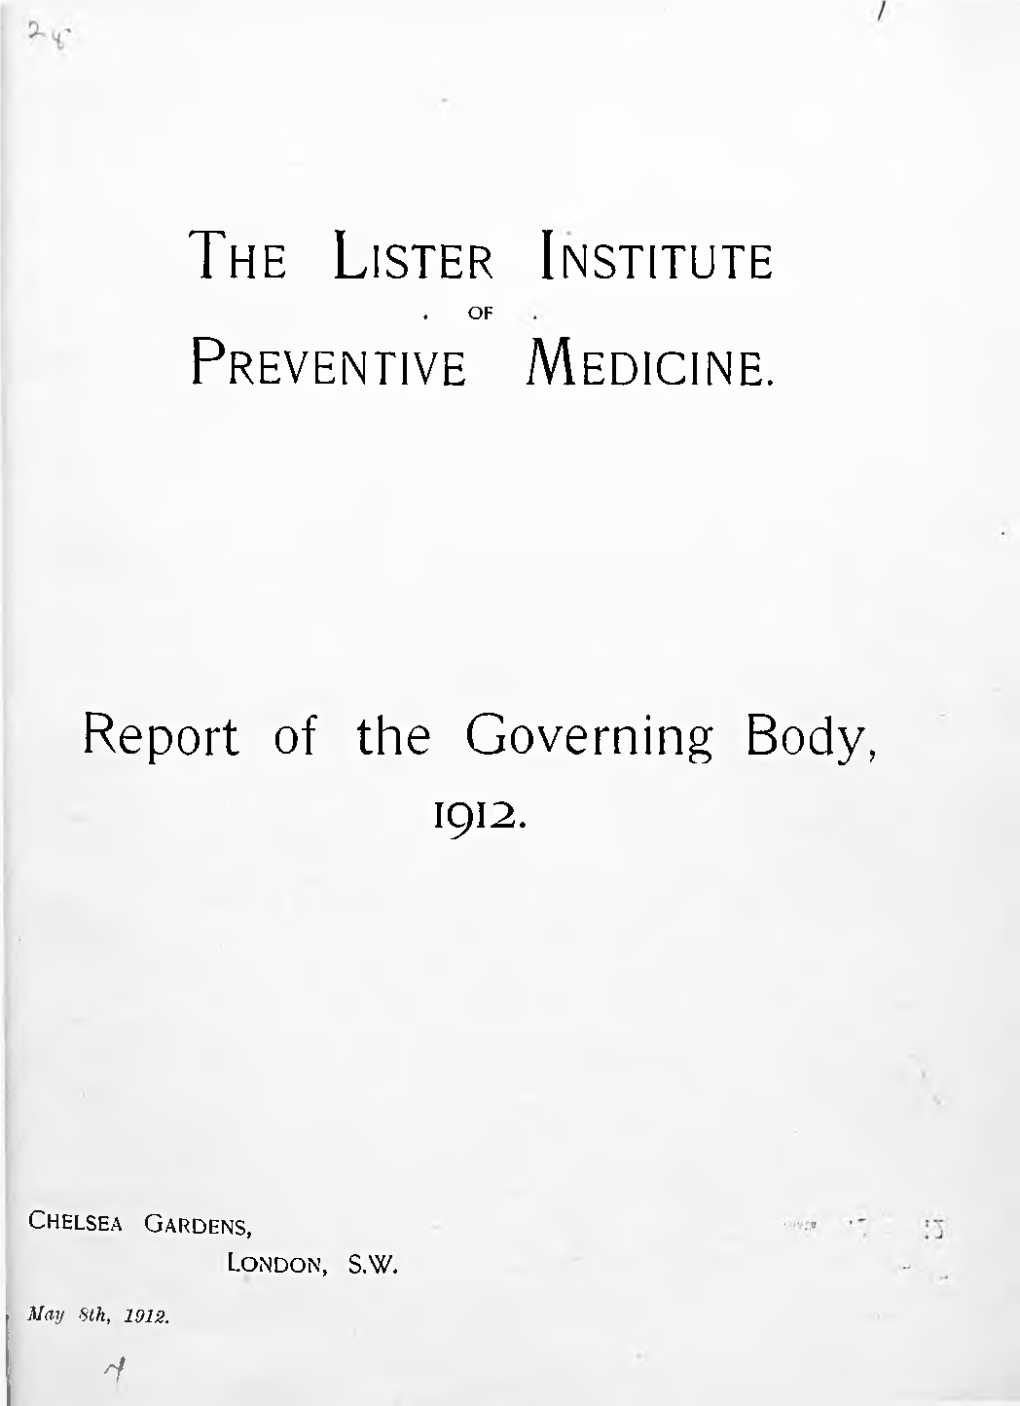 1912 to 1924 Lister Annual Report and Accounts